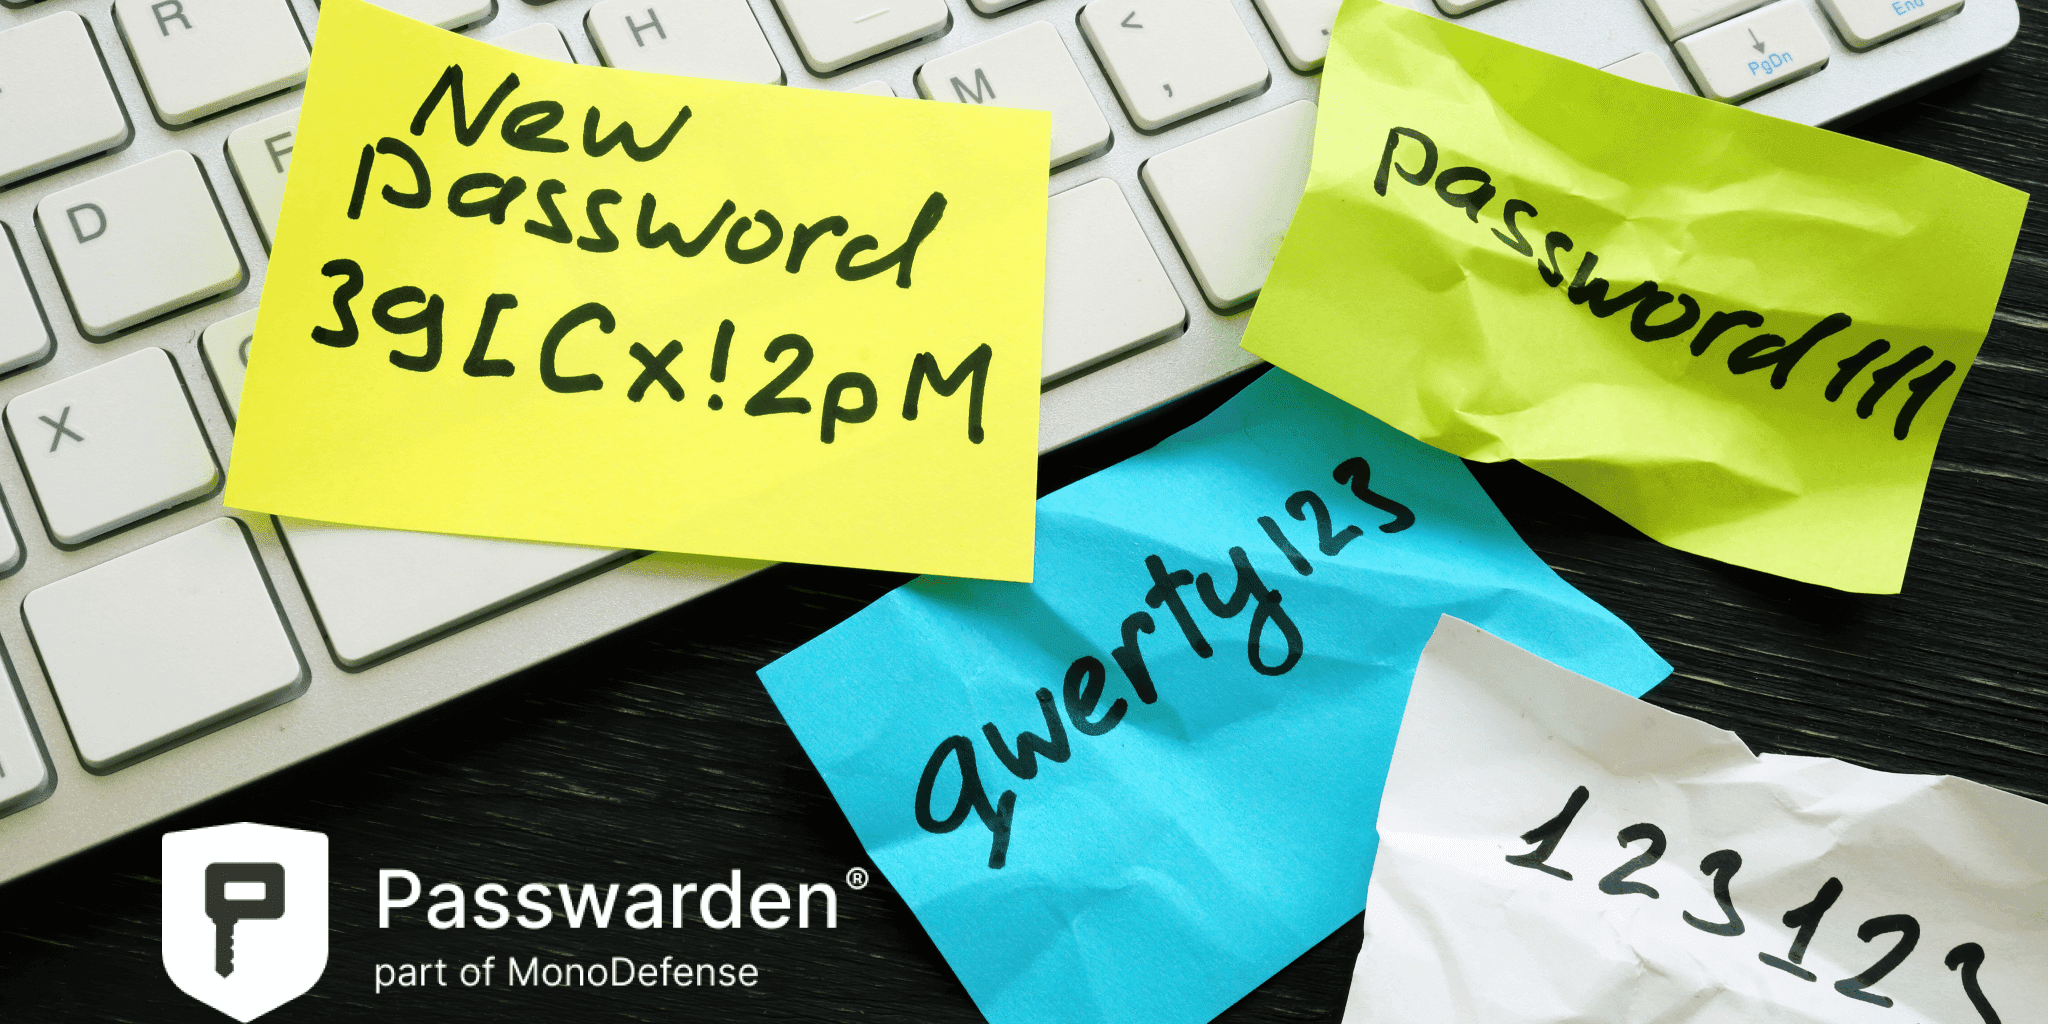 How to Create a Bad Password - Write down your passwords